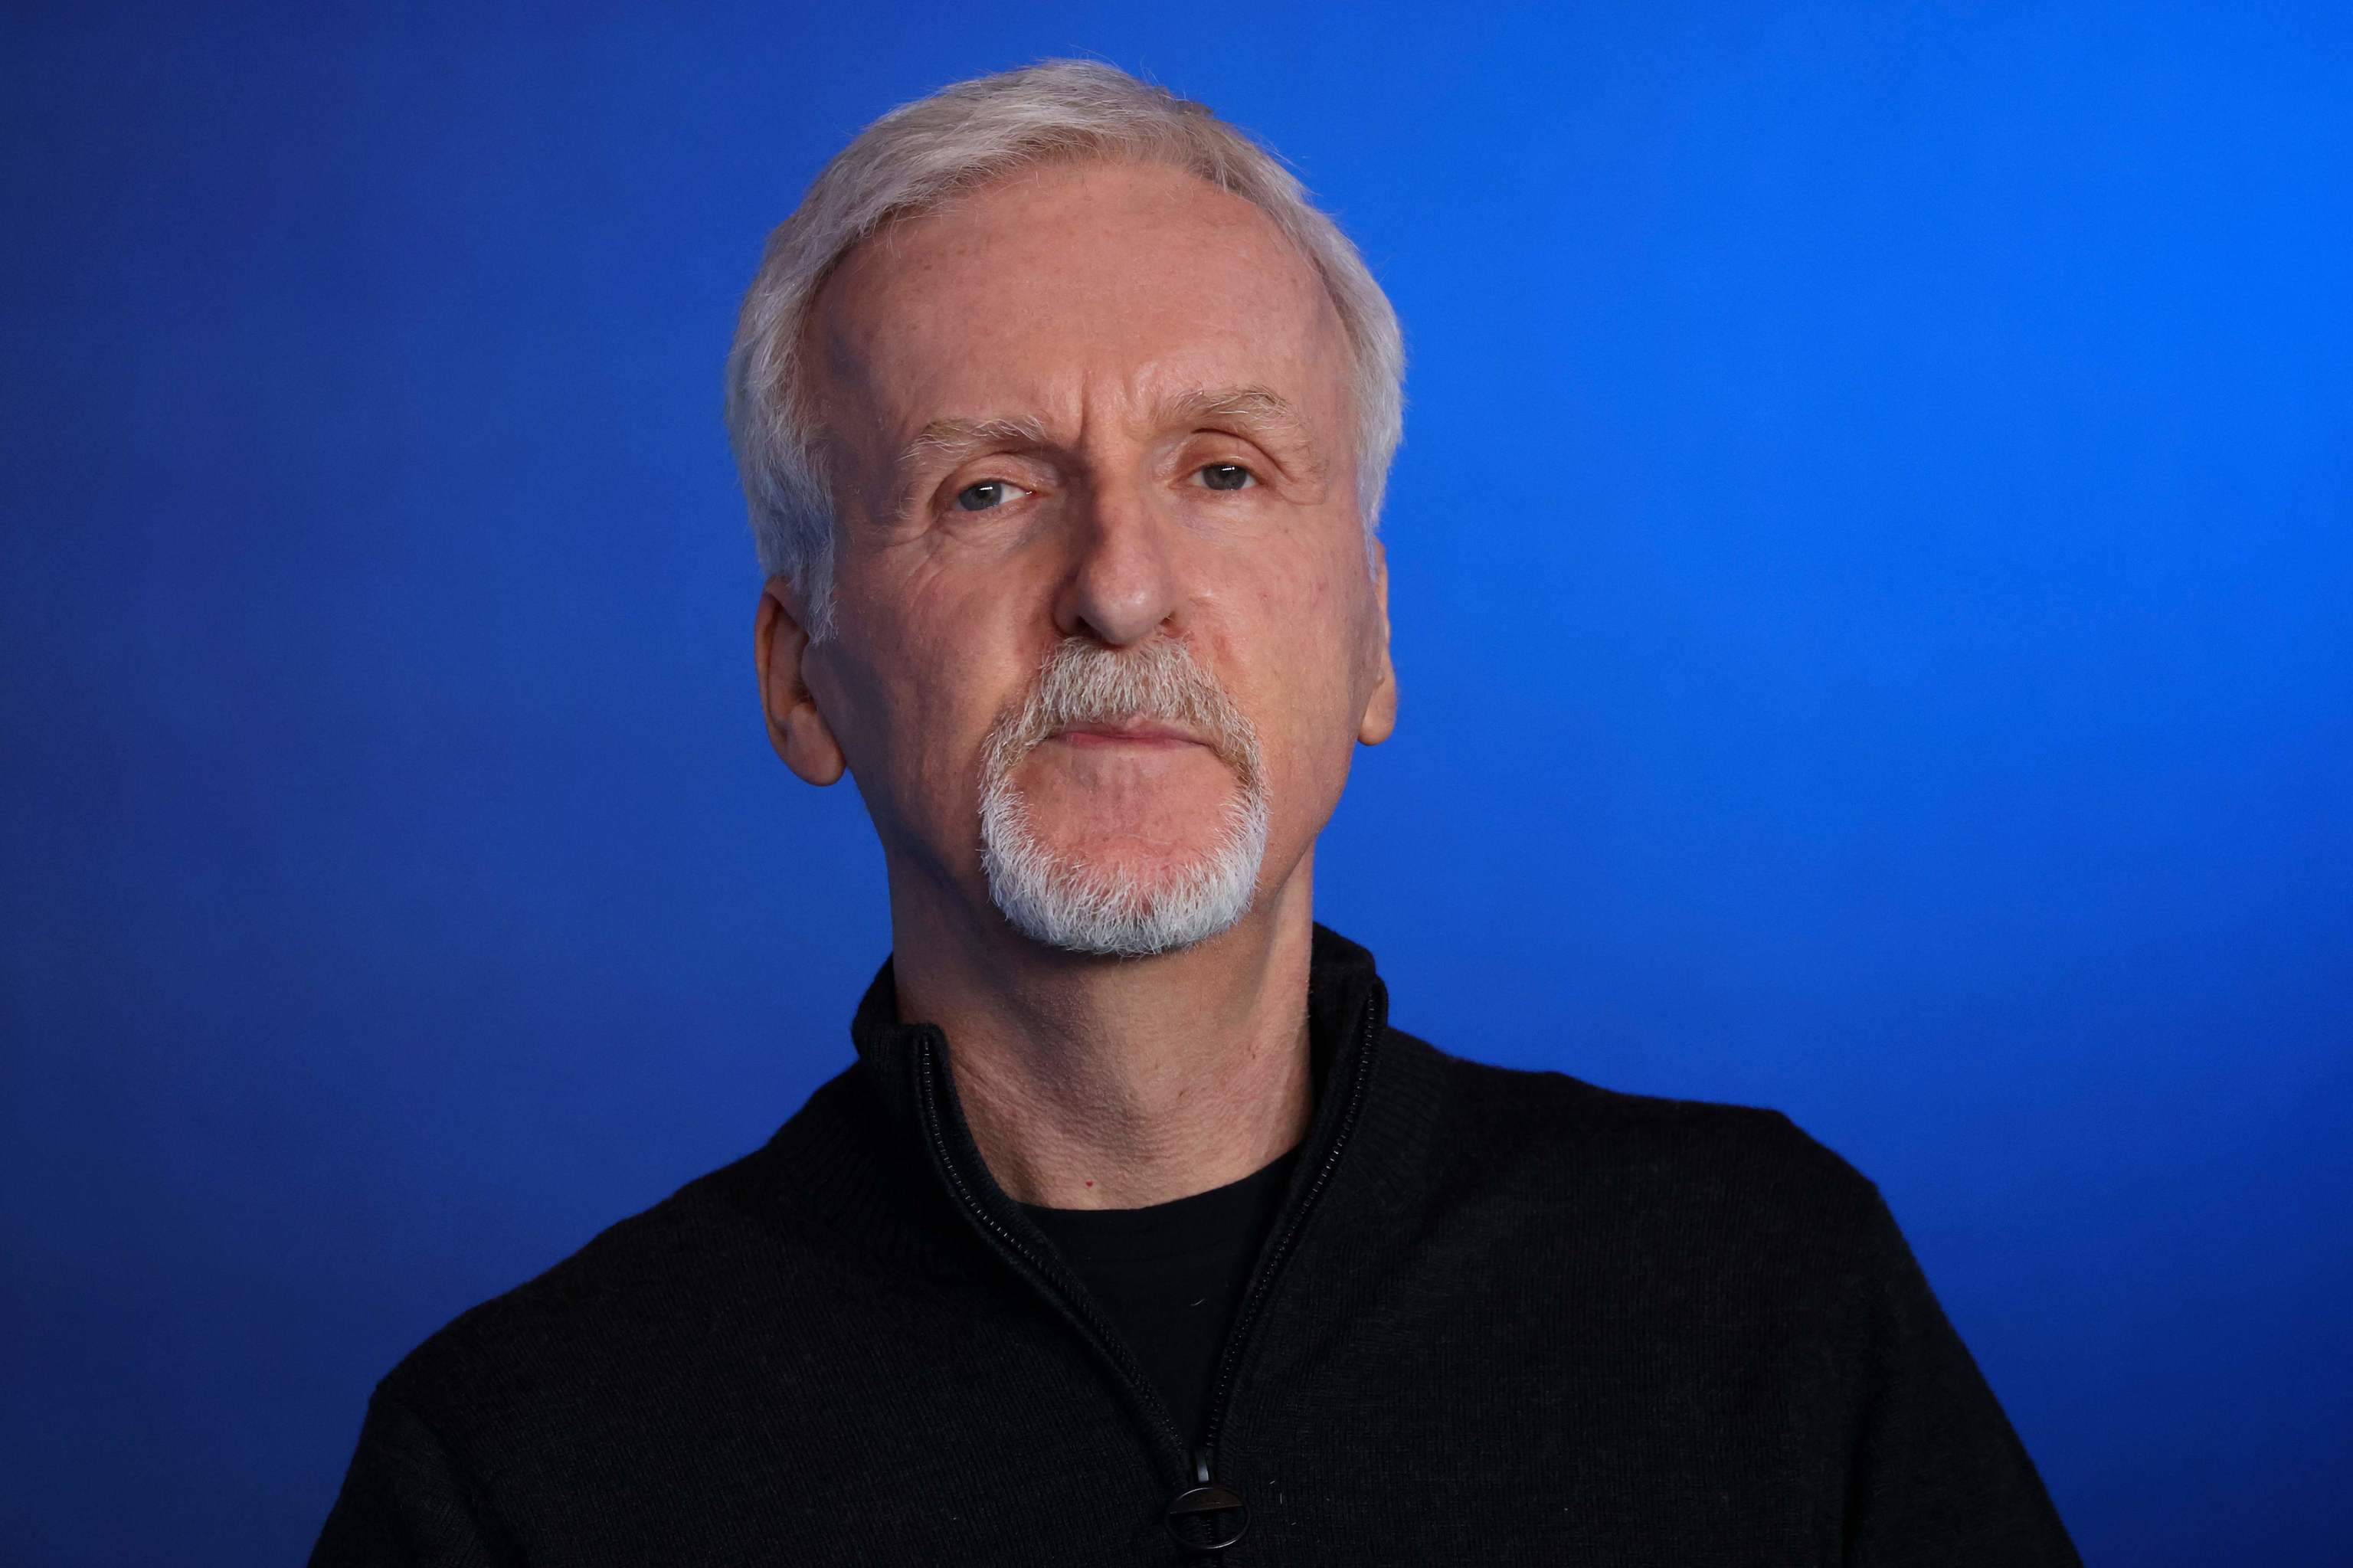 Avatar Director James Cameron Defends 3hour Sequel Runtime Against  Whining Critics